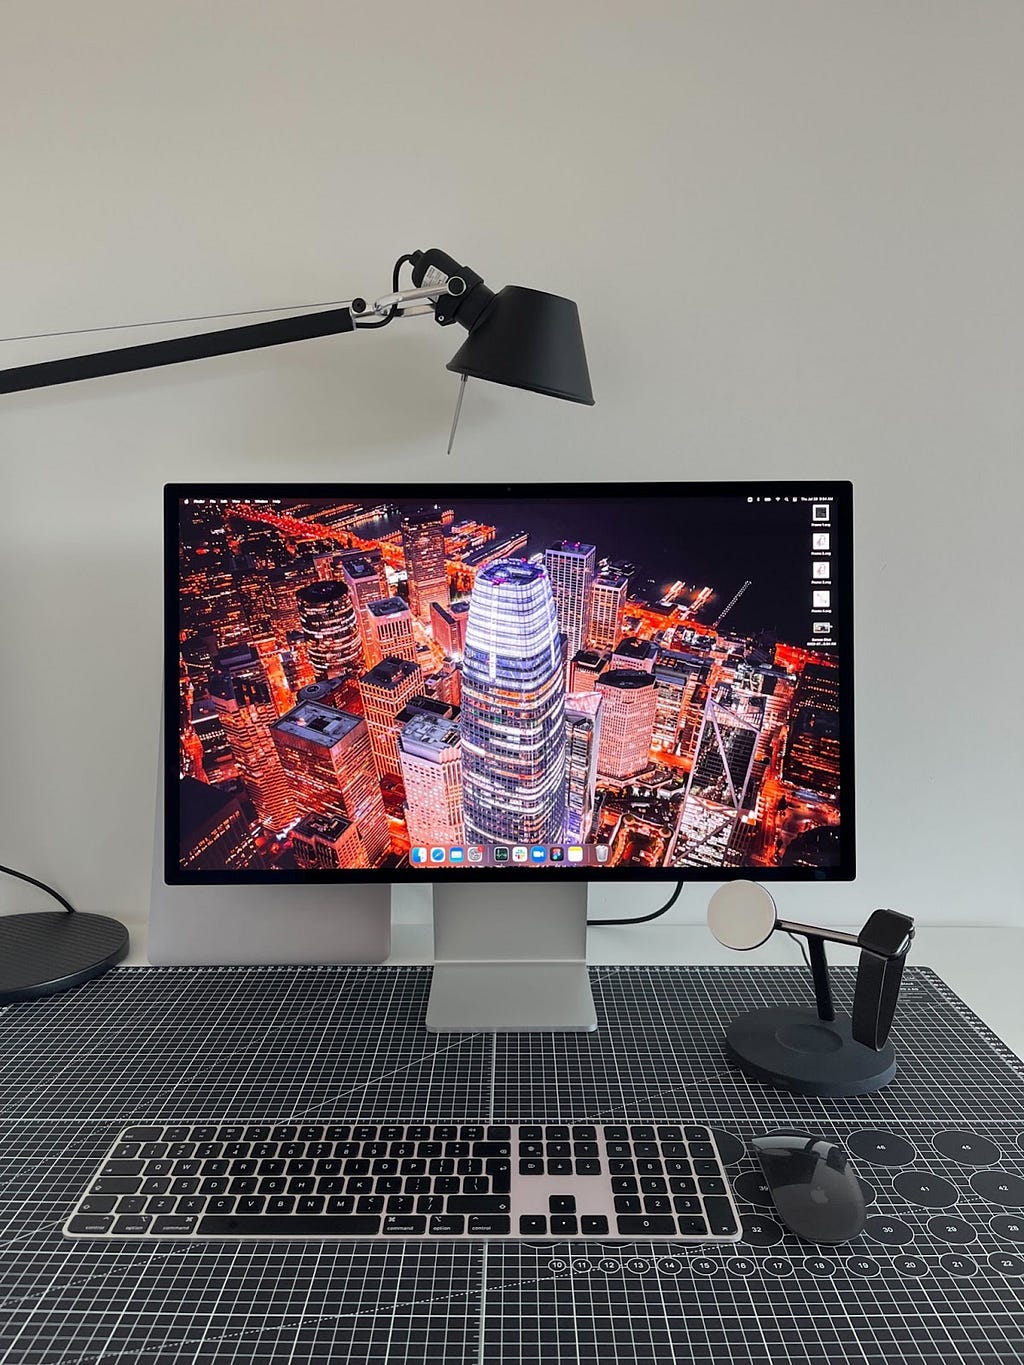 Image of a desk setup with a monitor, lamp and apple charging station.